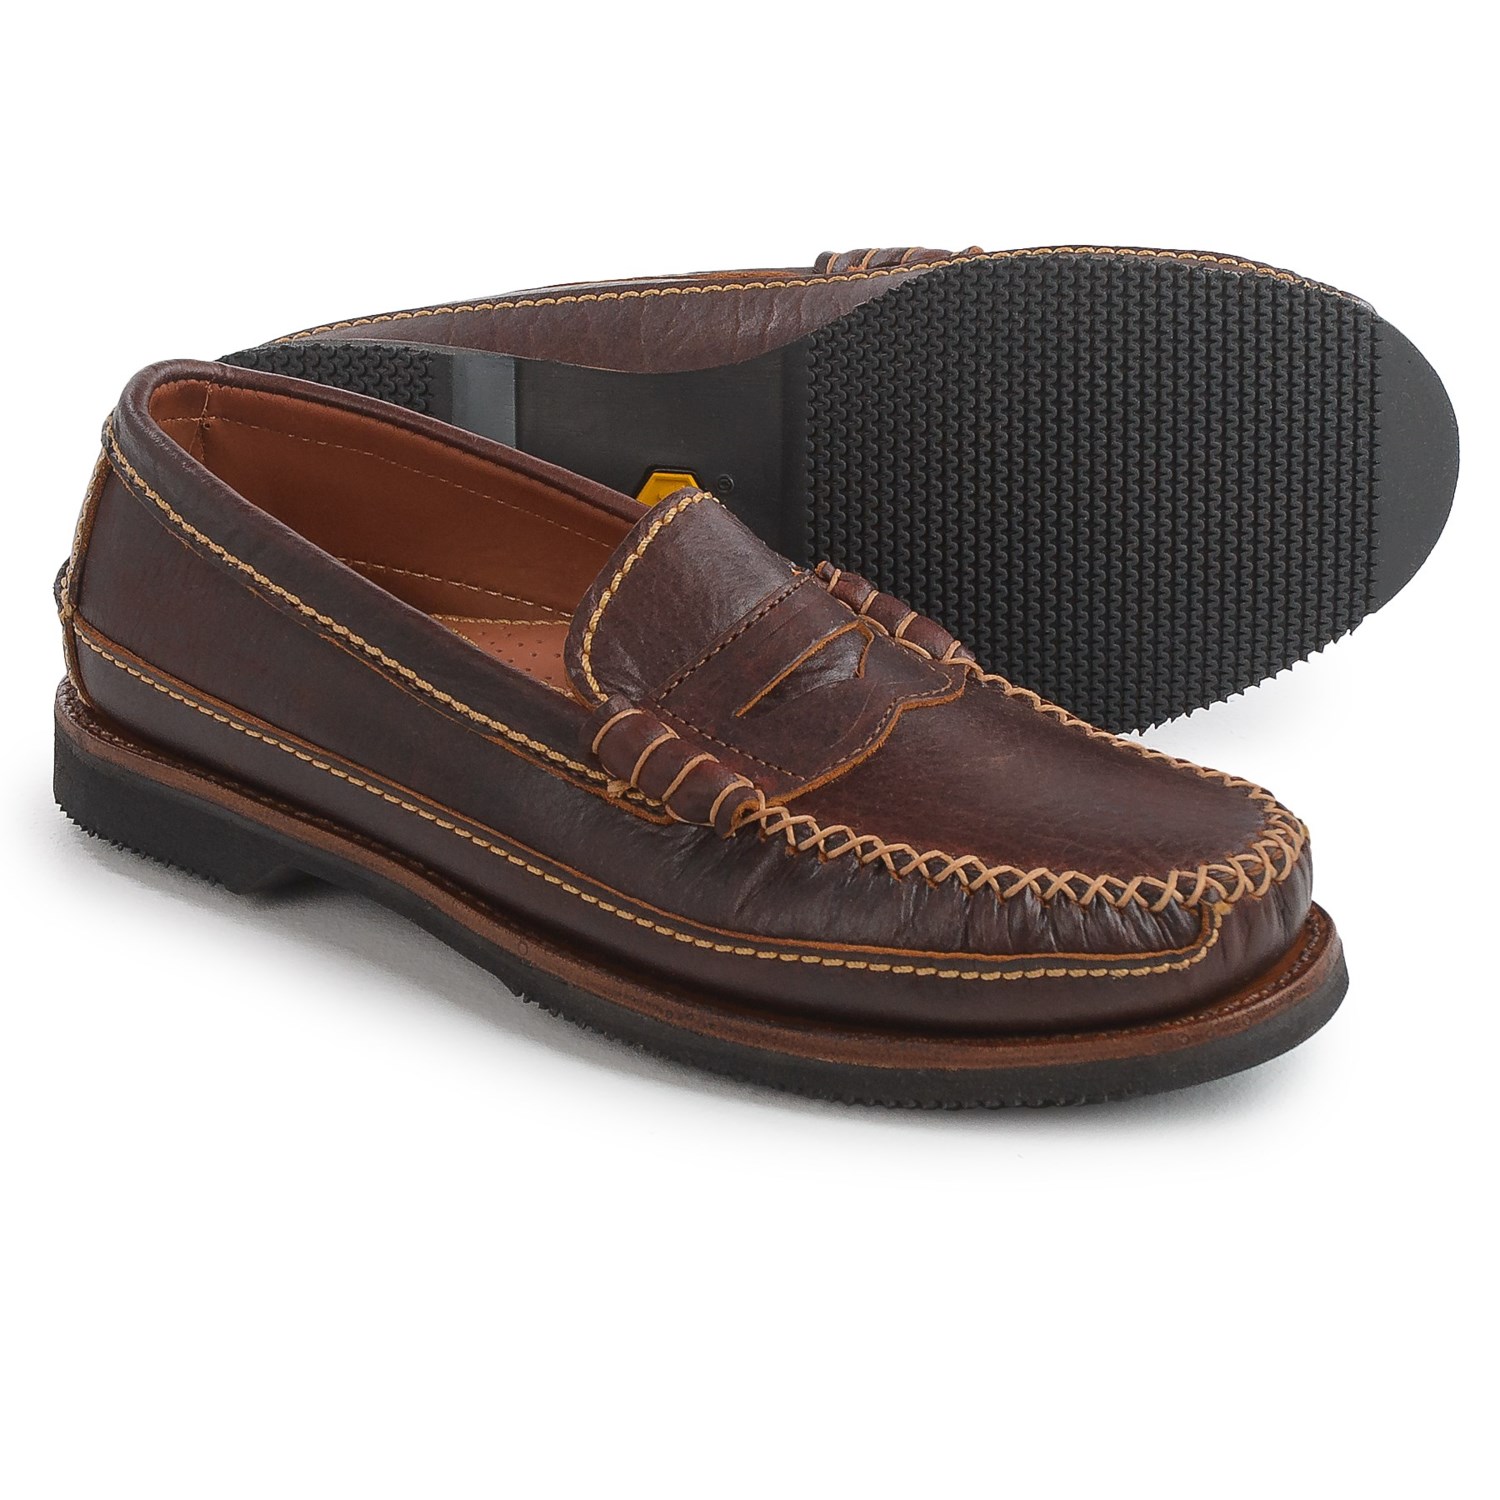 Chippewa American Bison Leather Penny Loafers – Leather, Slip-Ons (For Men)